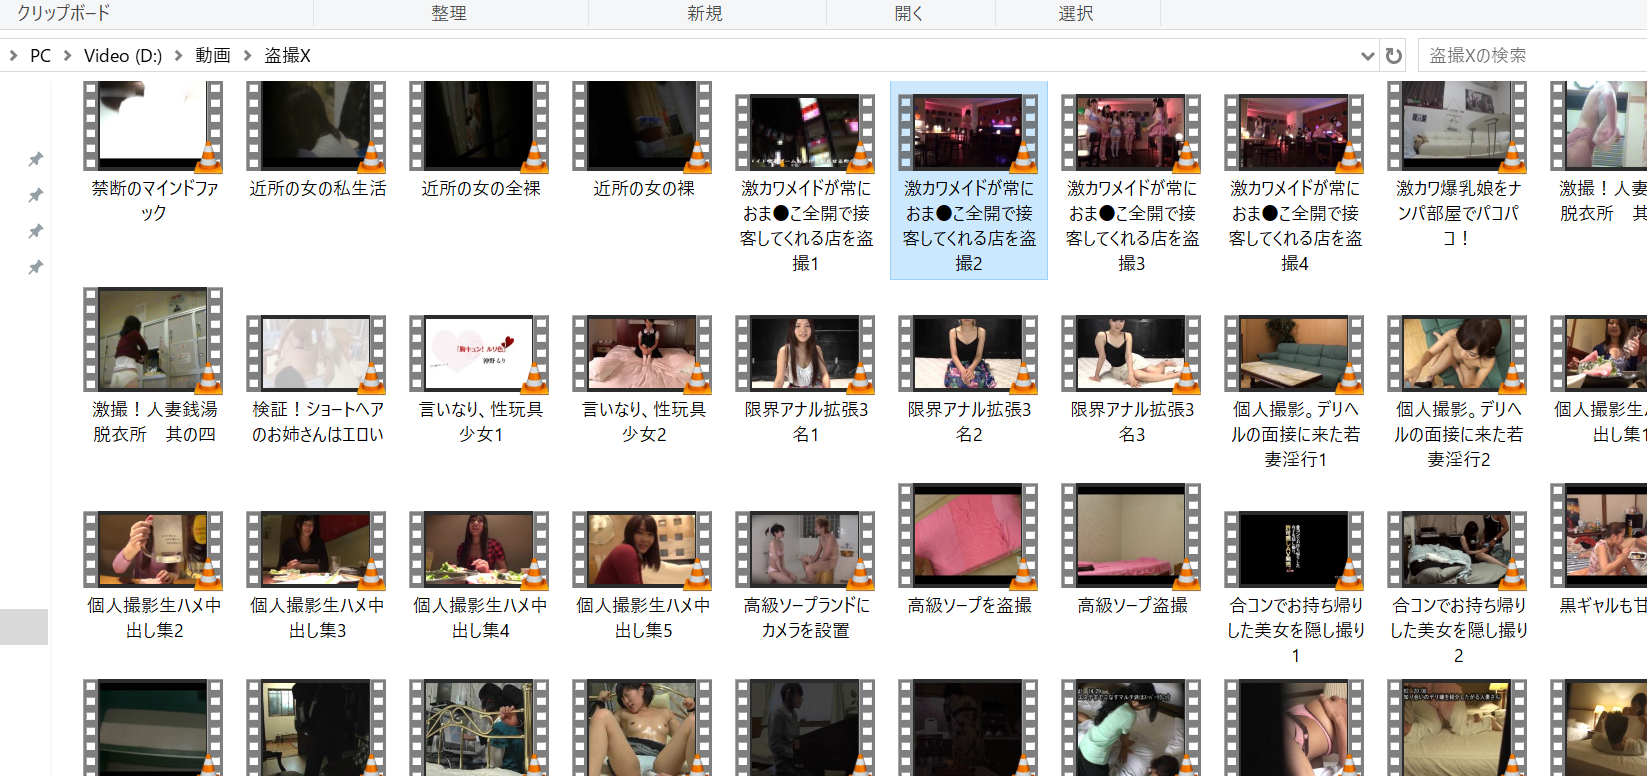 just a part of the uncensored JAV erotic videos I downloaded from Voyeur X